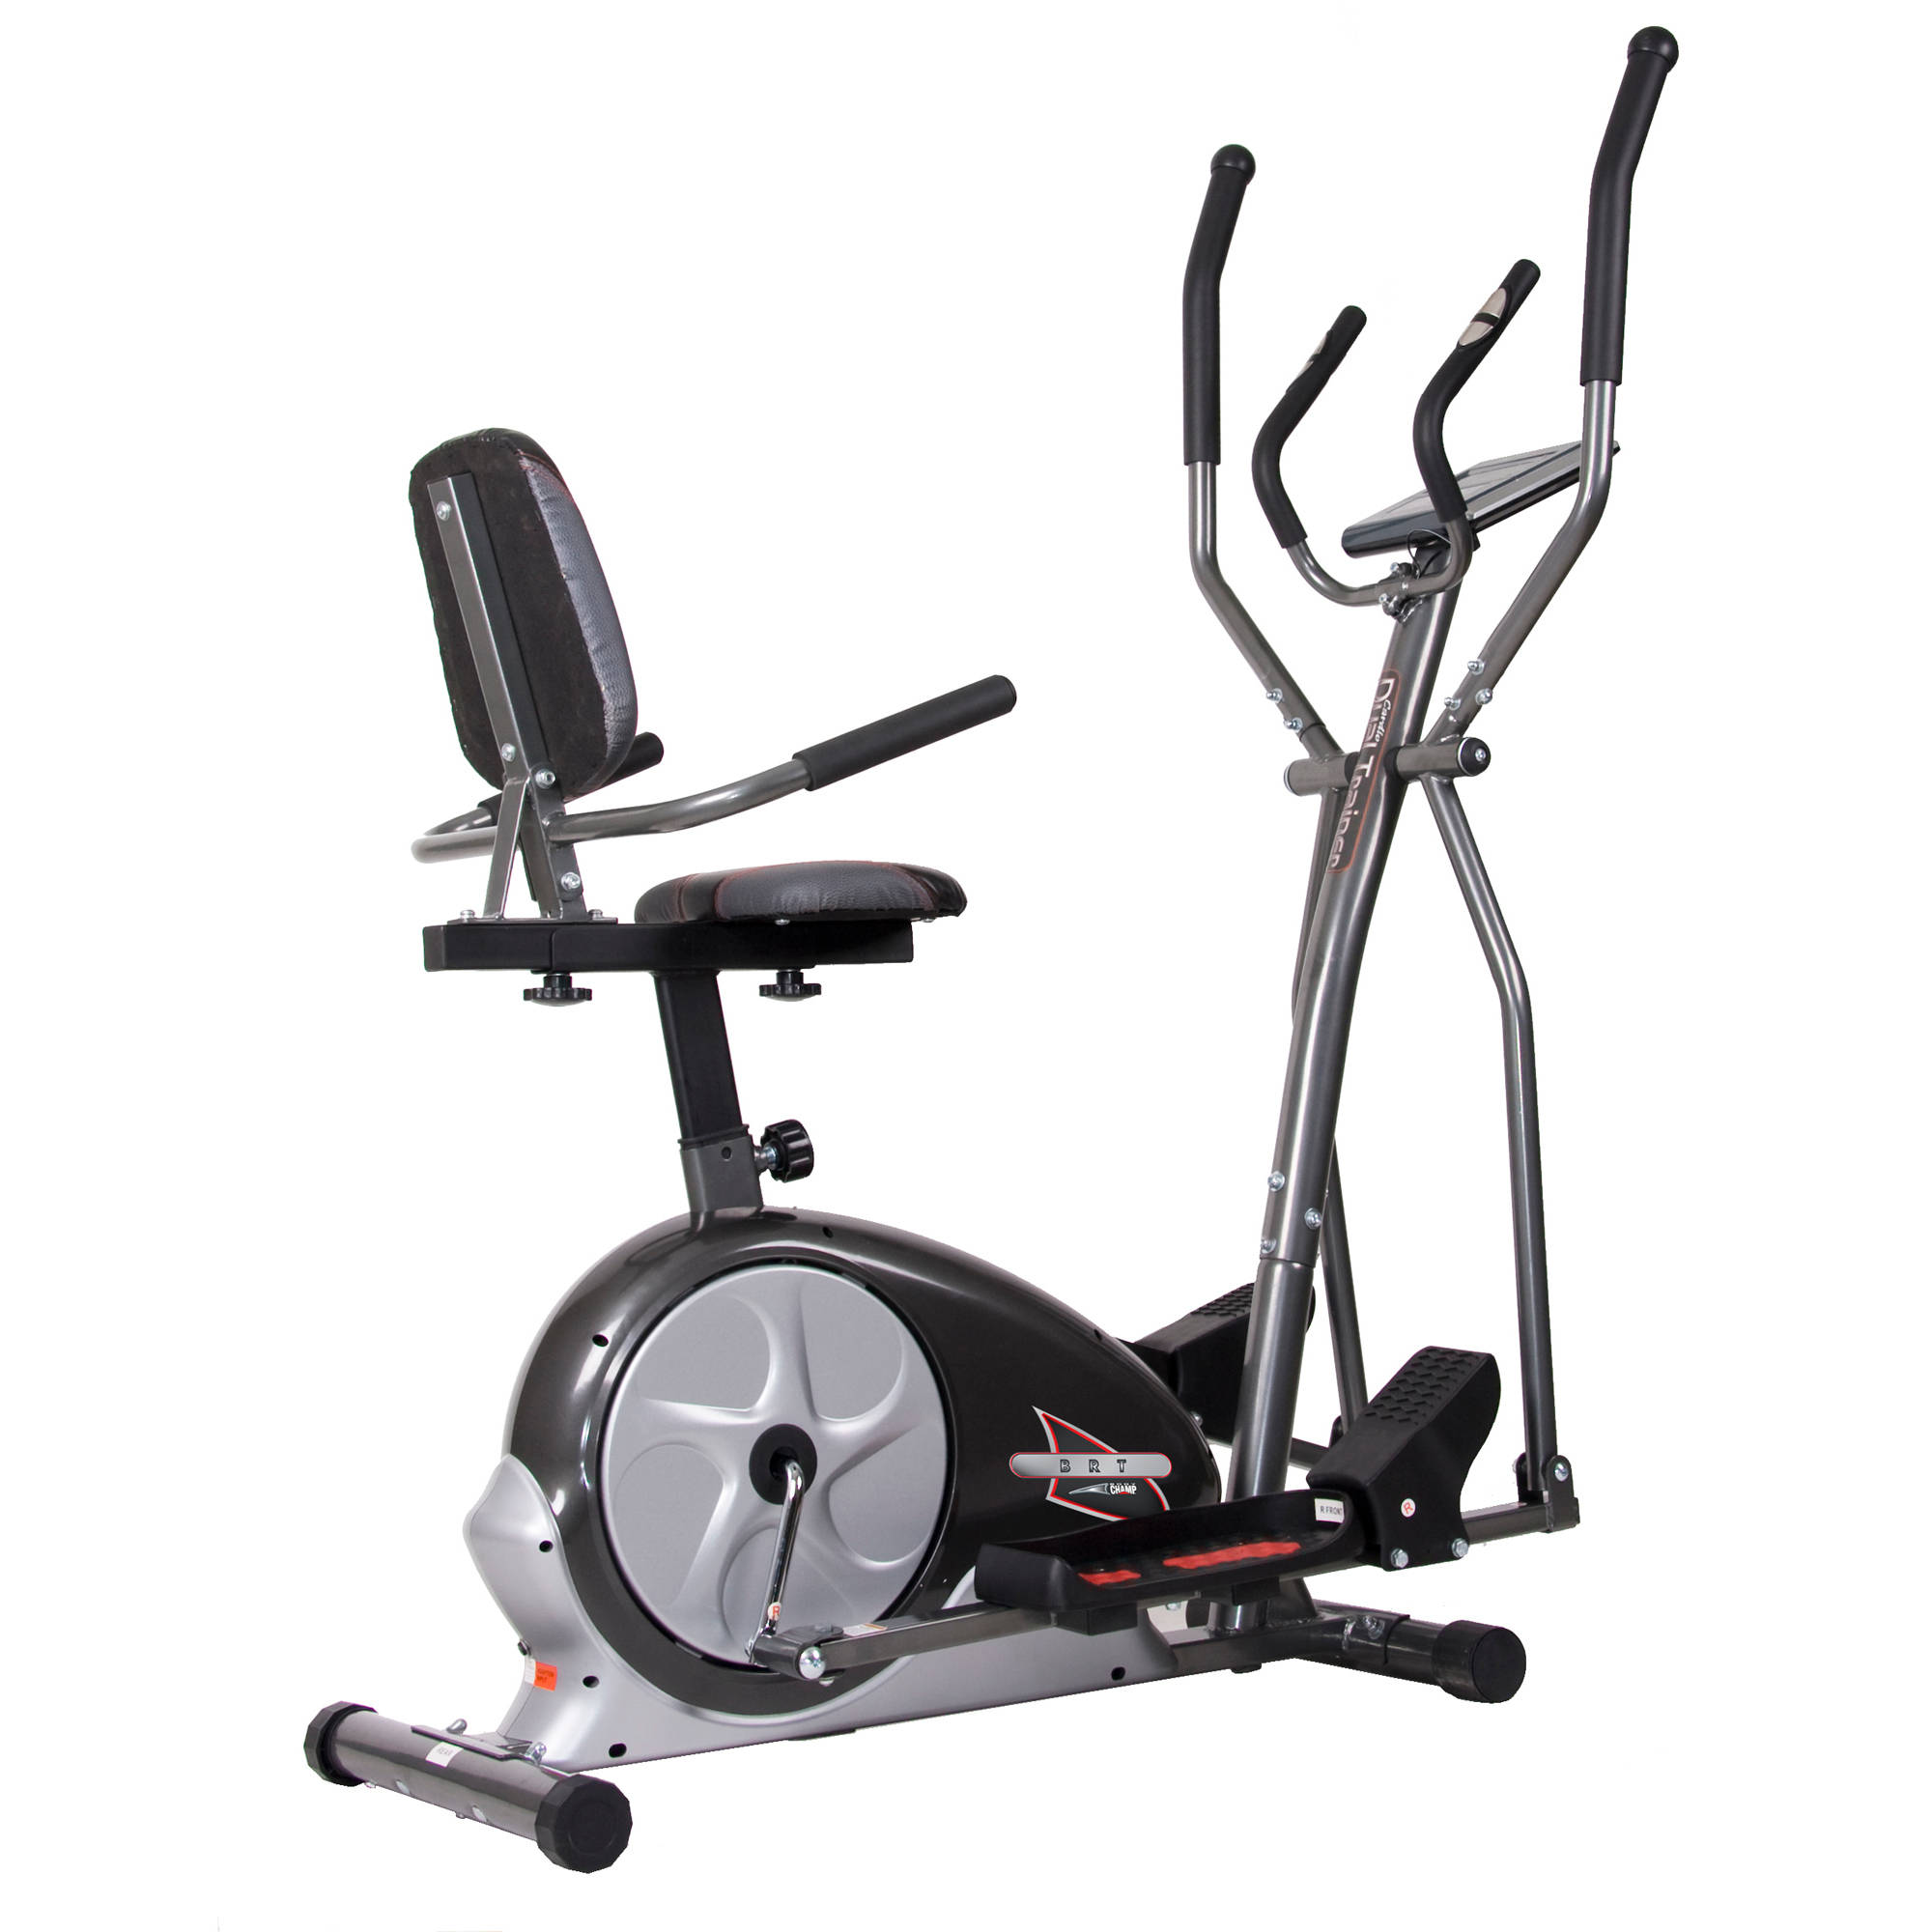 Body Champ BRT3858 Trio Trainer, Manual Resistance, Heart Rate, 12.5" Stride, Max 250 lbs - image 2 of 2